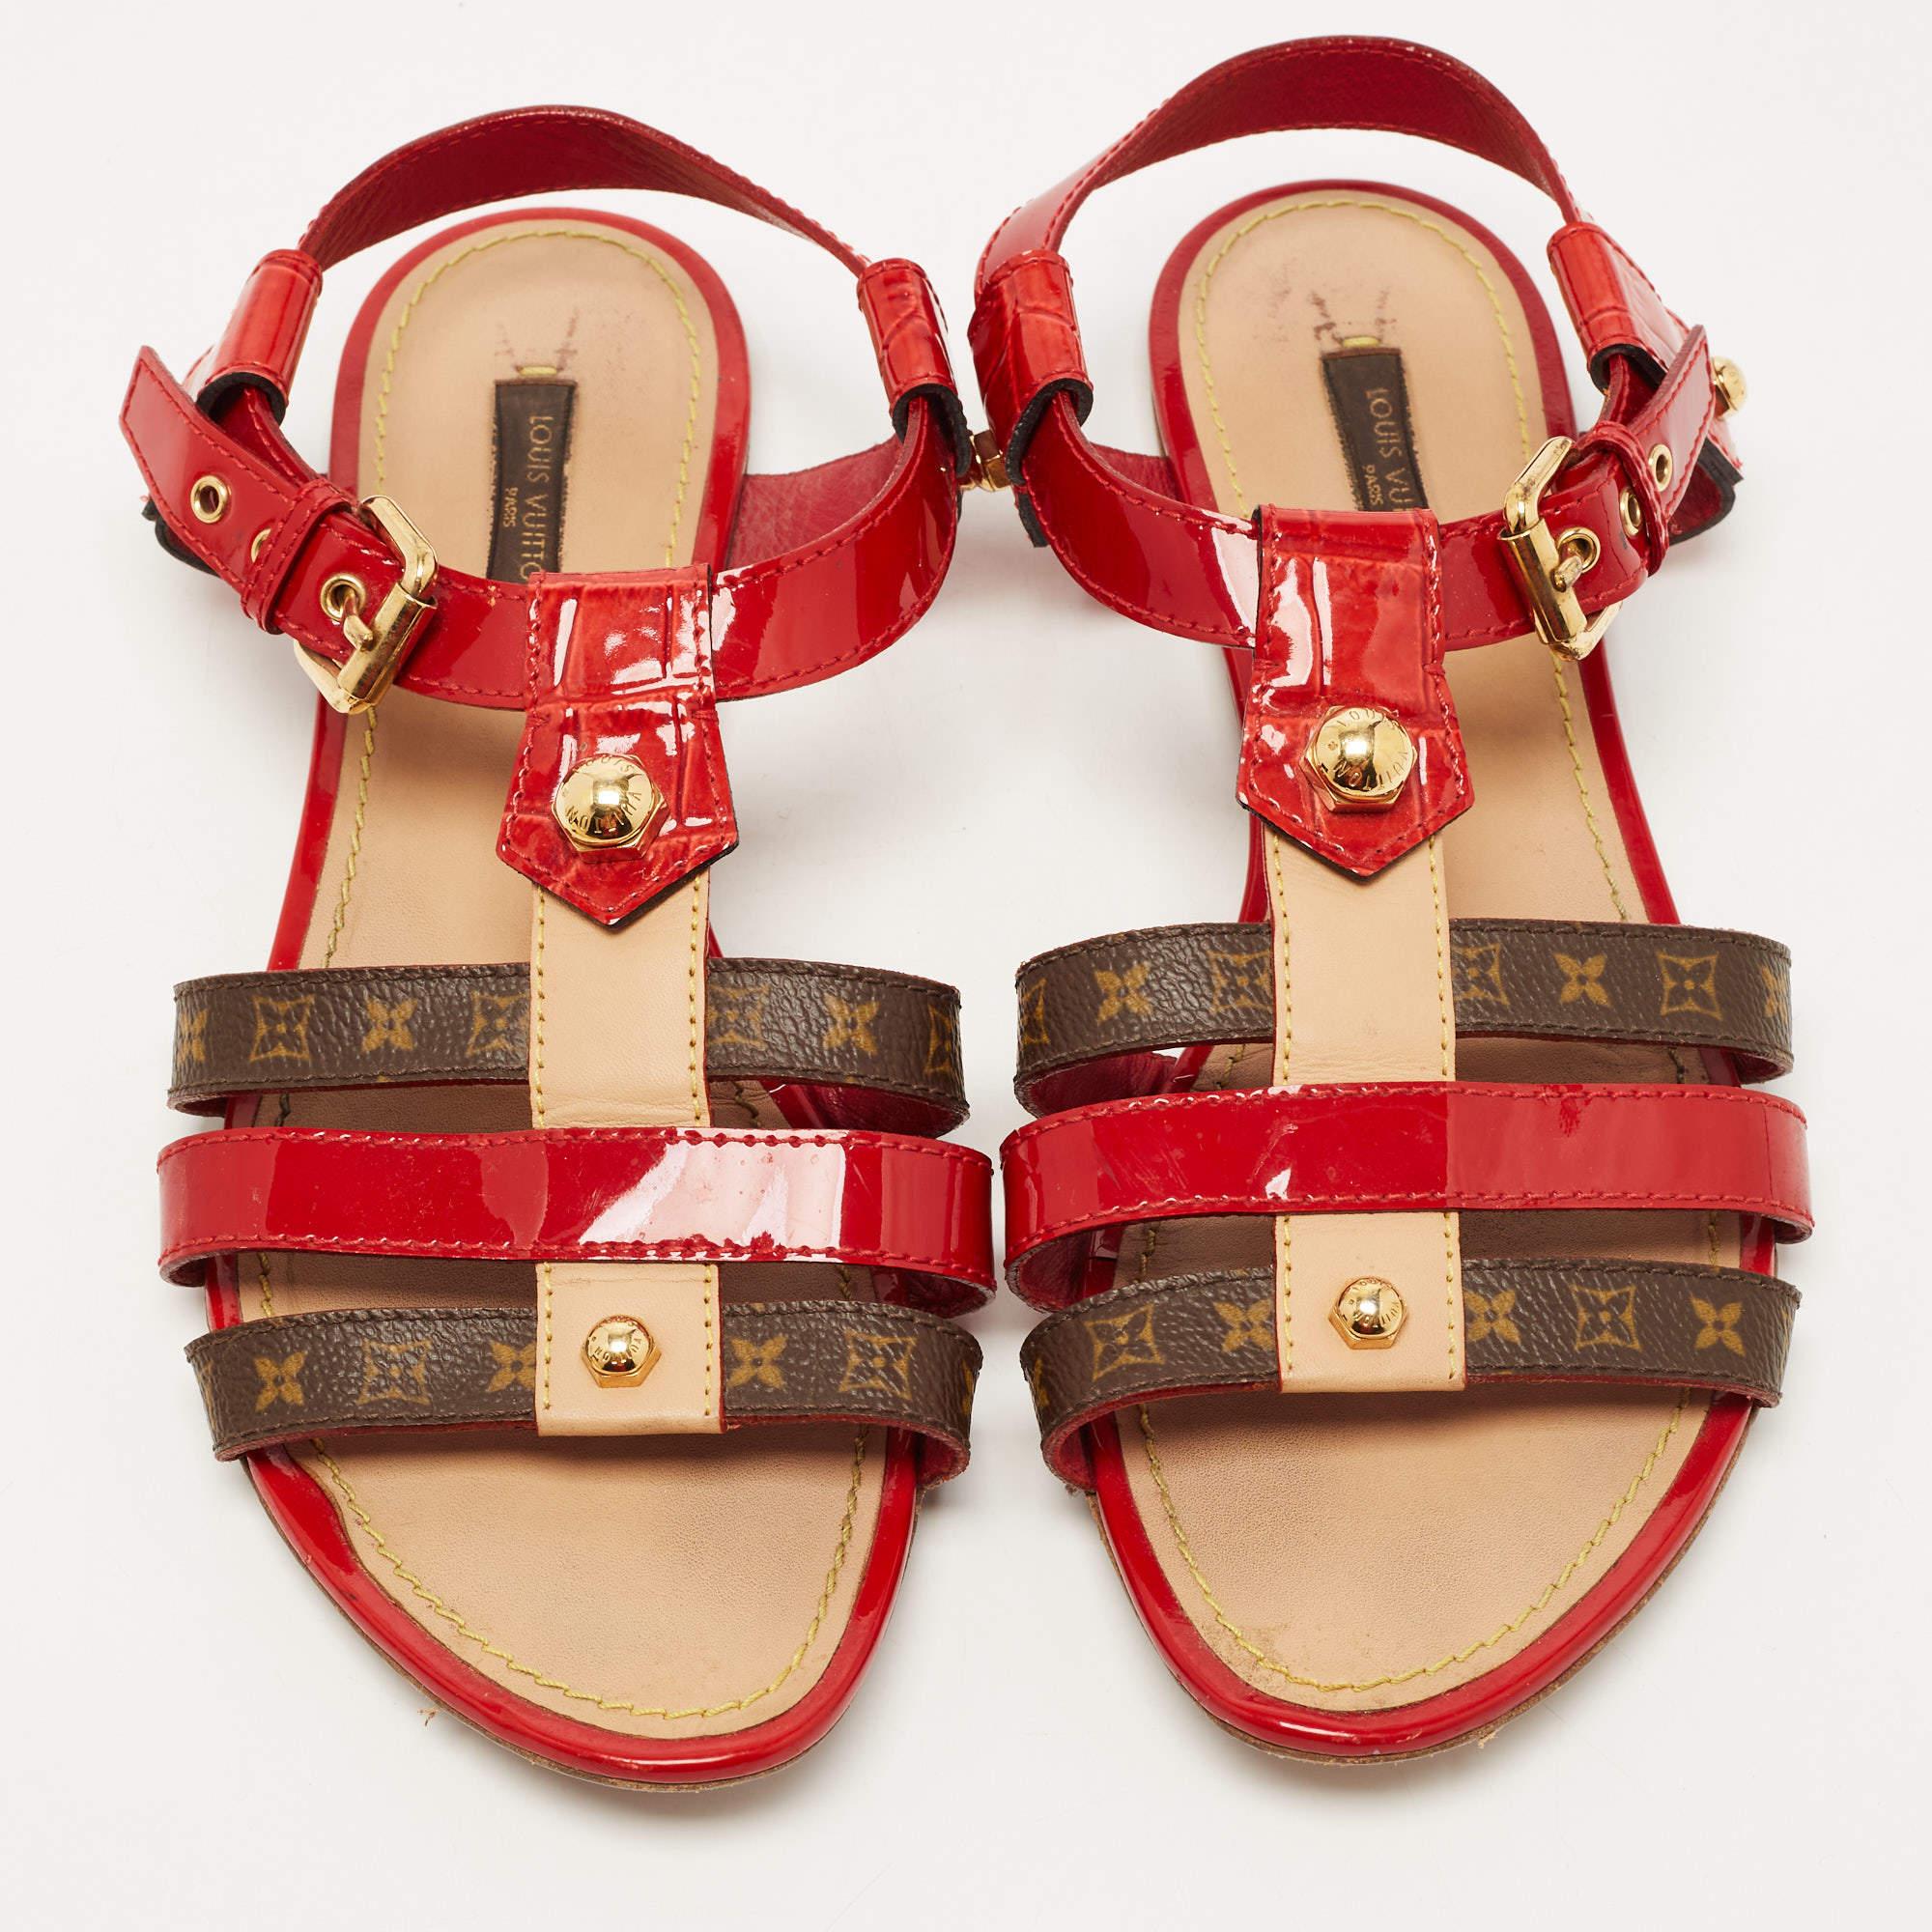 Louis Vuitton Red/Brown Patent Leather and Monogram Canvas Flat Sandals Size 37 1